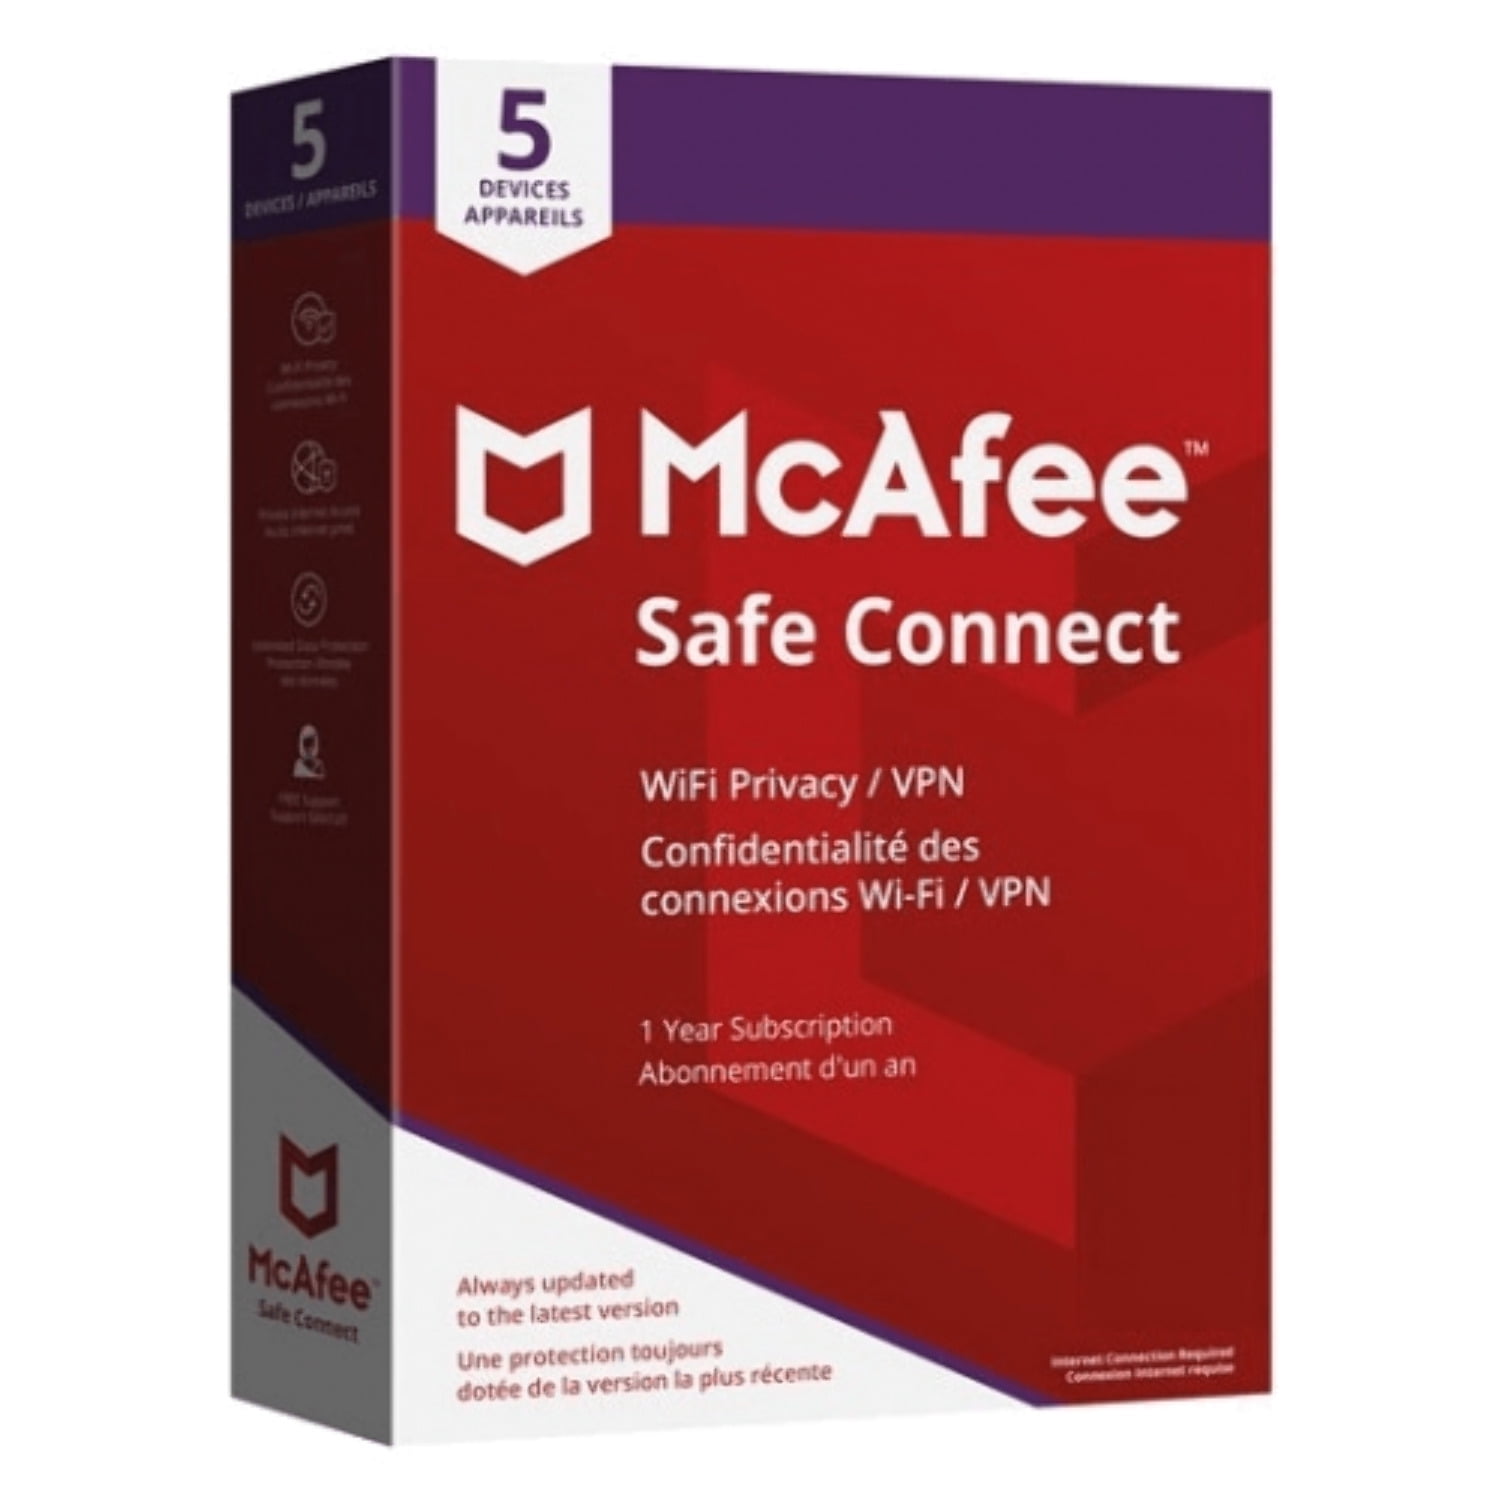 Mcafee safe connect download bootcamp won t download windows support software